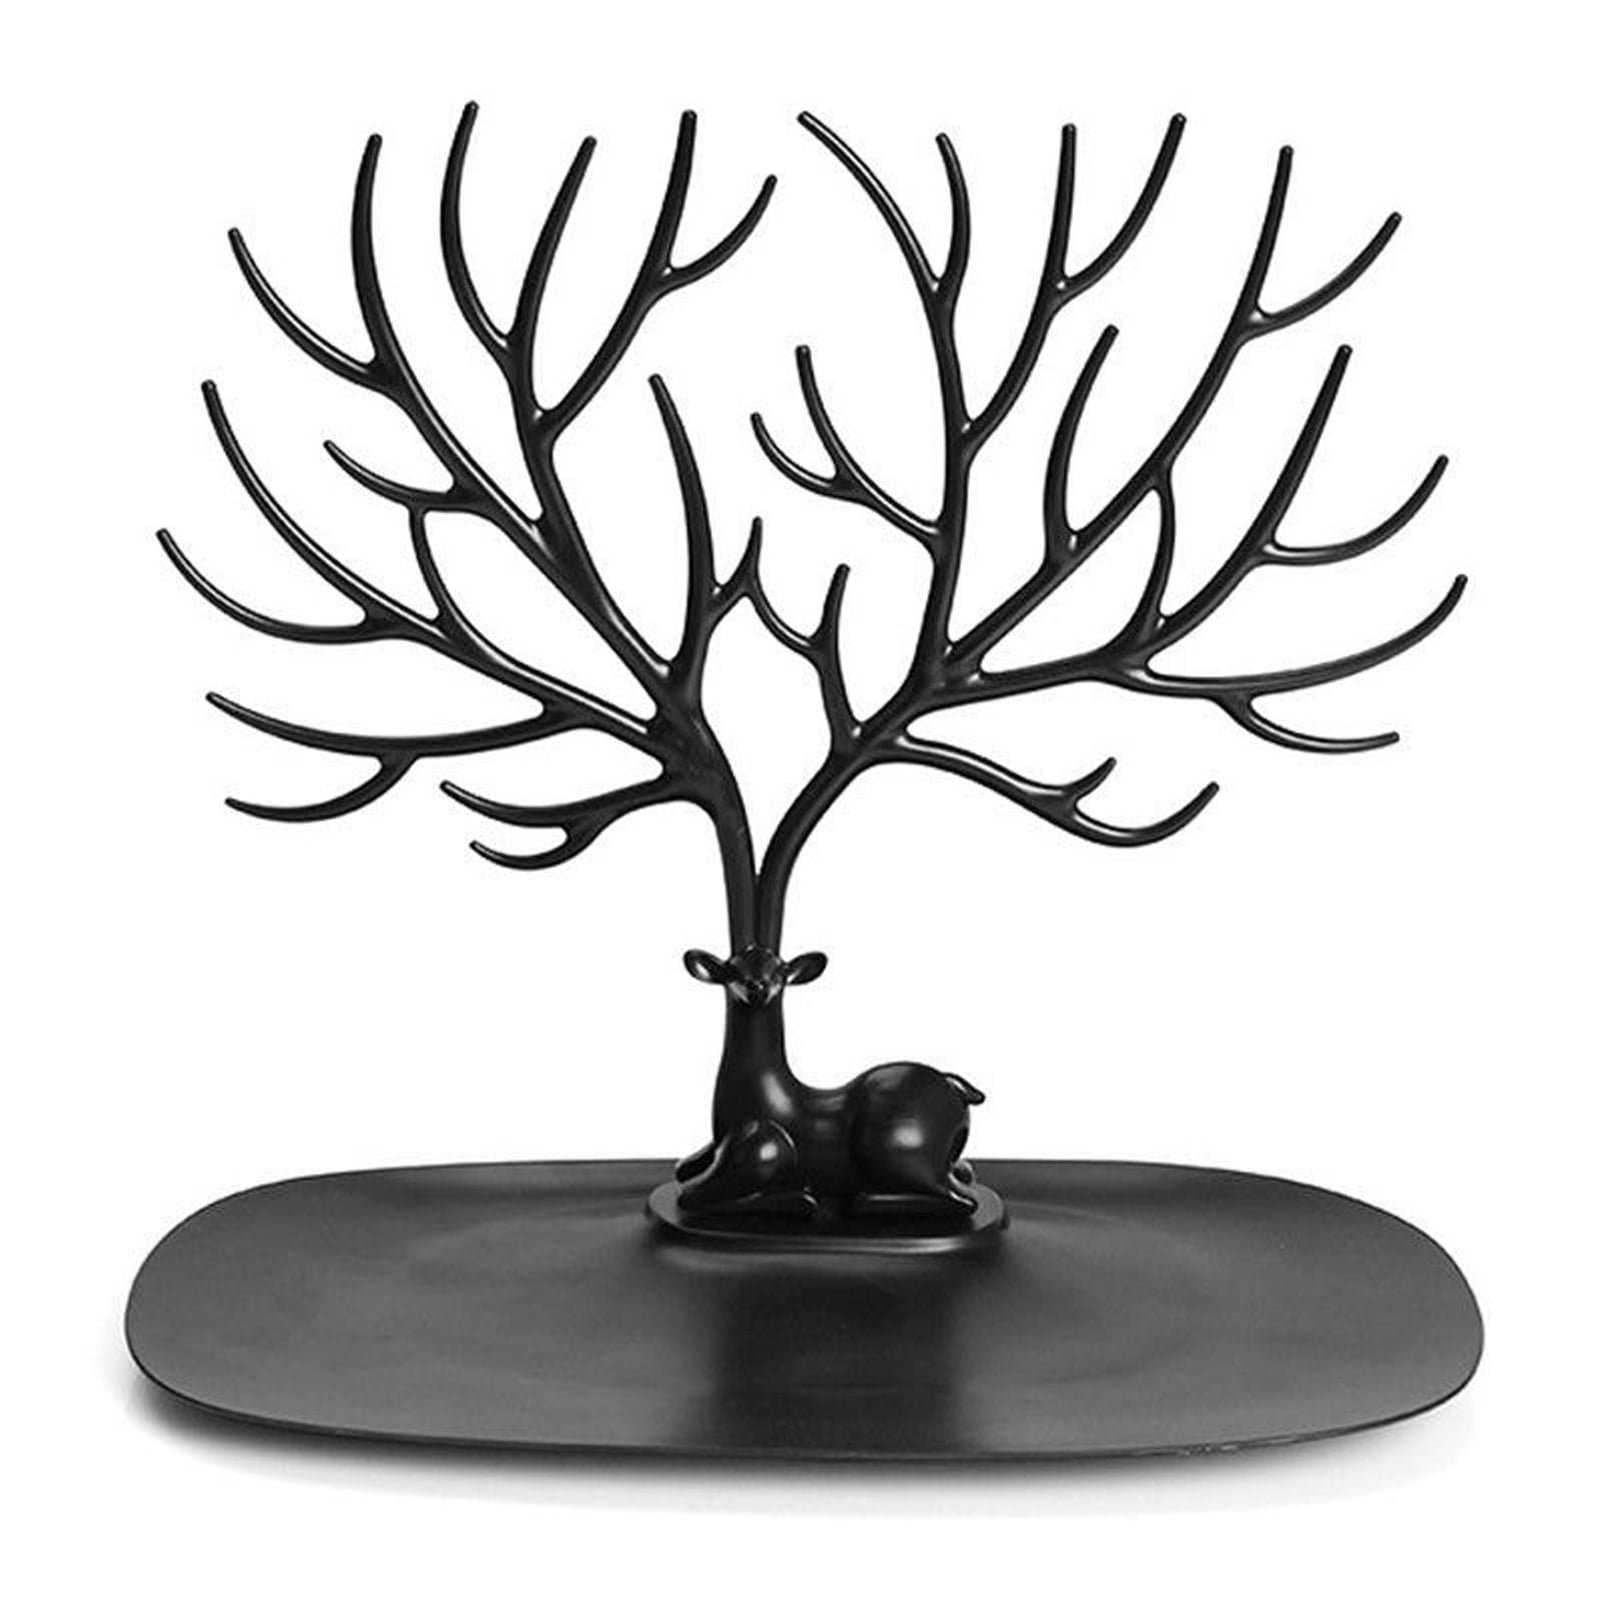 Display Jewellery Tree Deer Stand Holder Rack Show Earring Necklace Ring Retro 